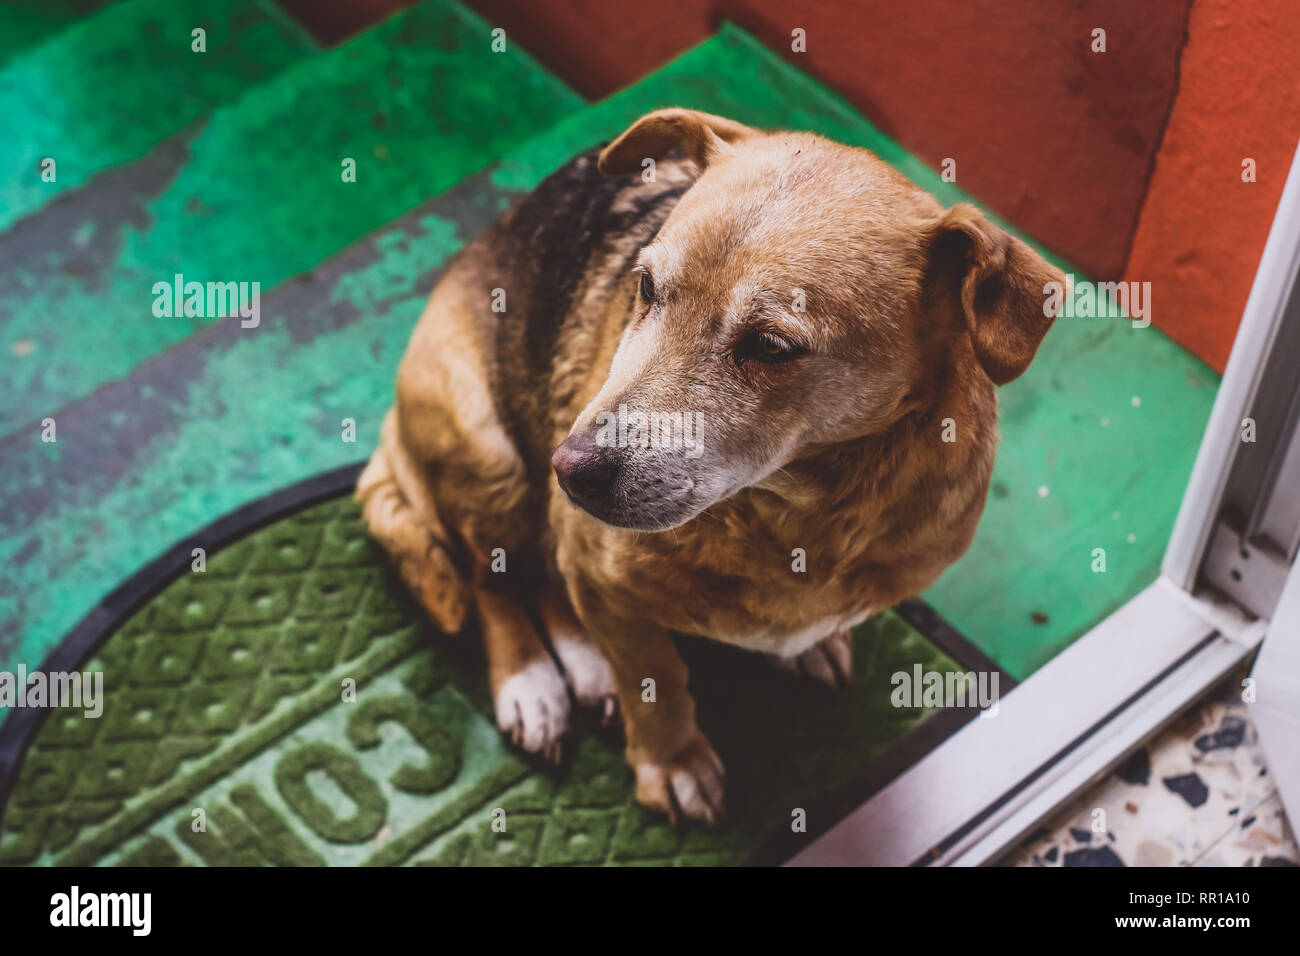 The dog is waiting for a play at the garden's door. An interesting photo of a animal that can't wait for a play. My dear shy friend. Stock Photo